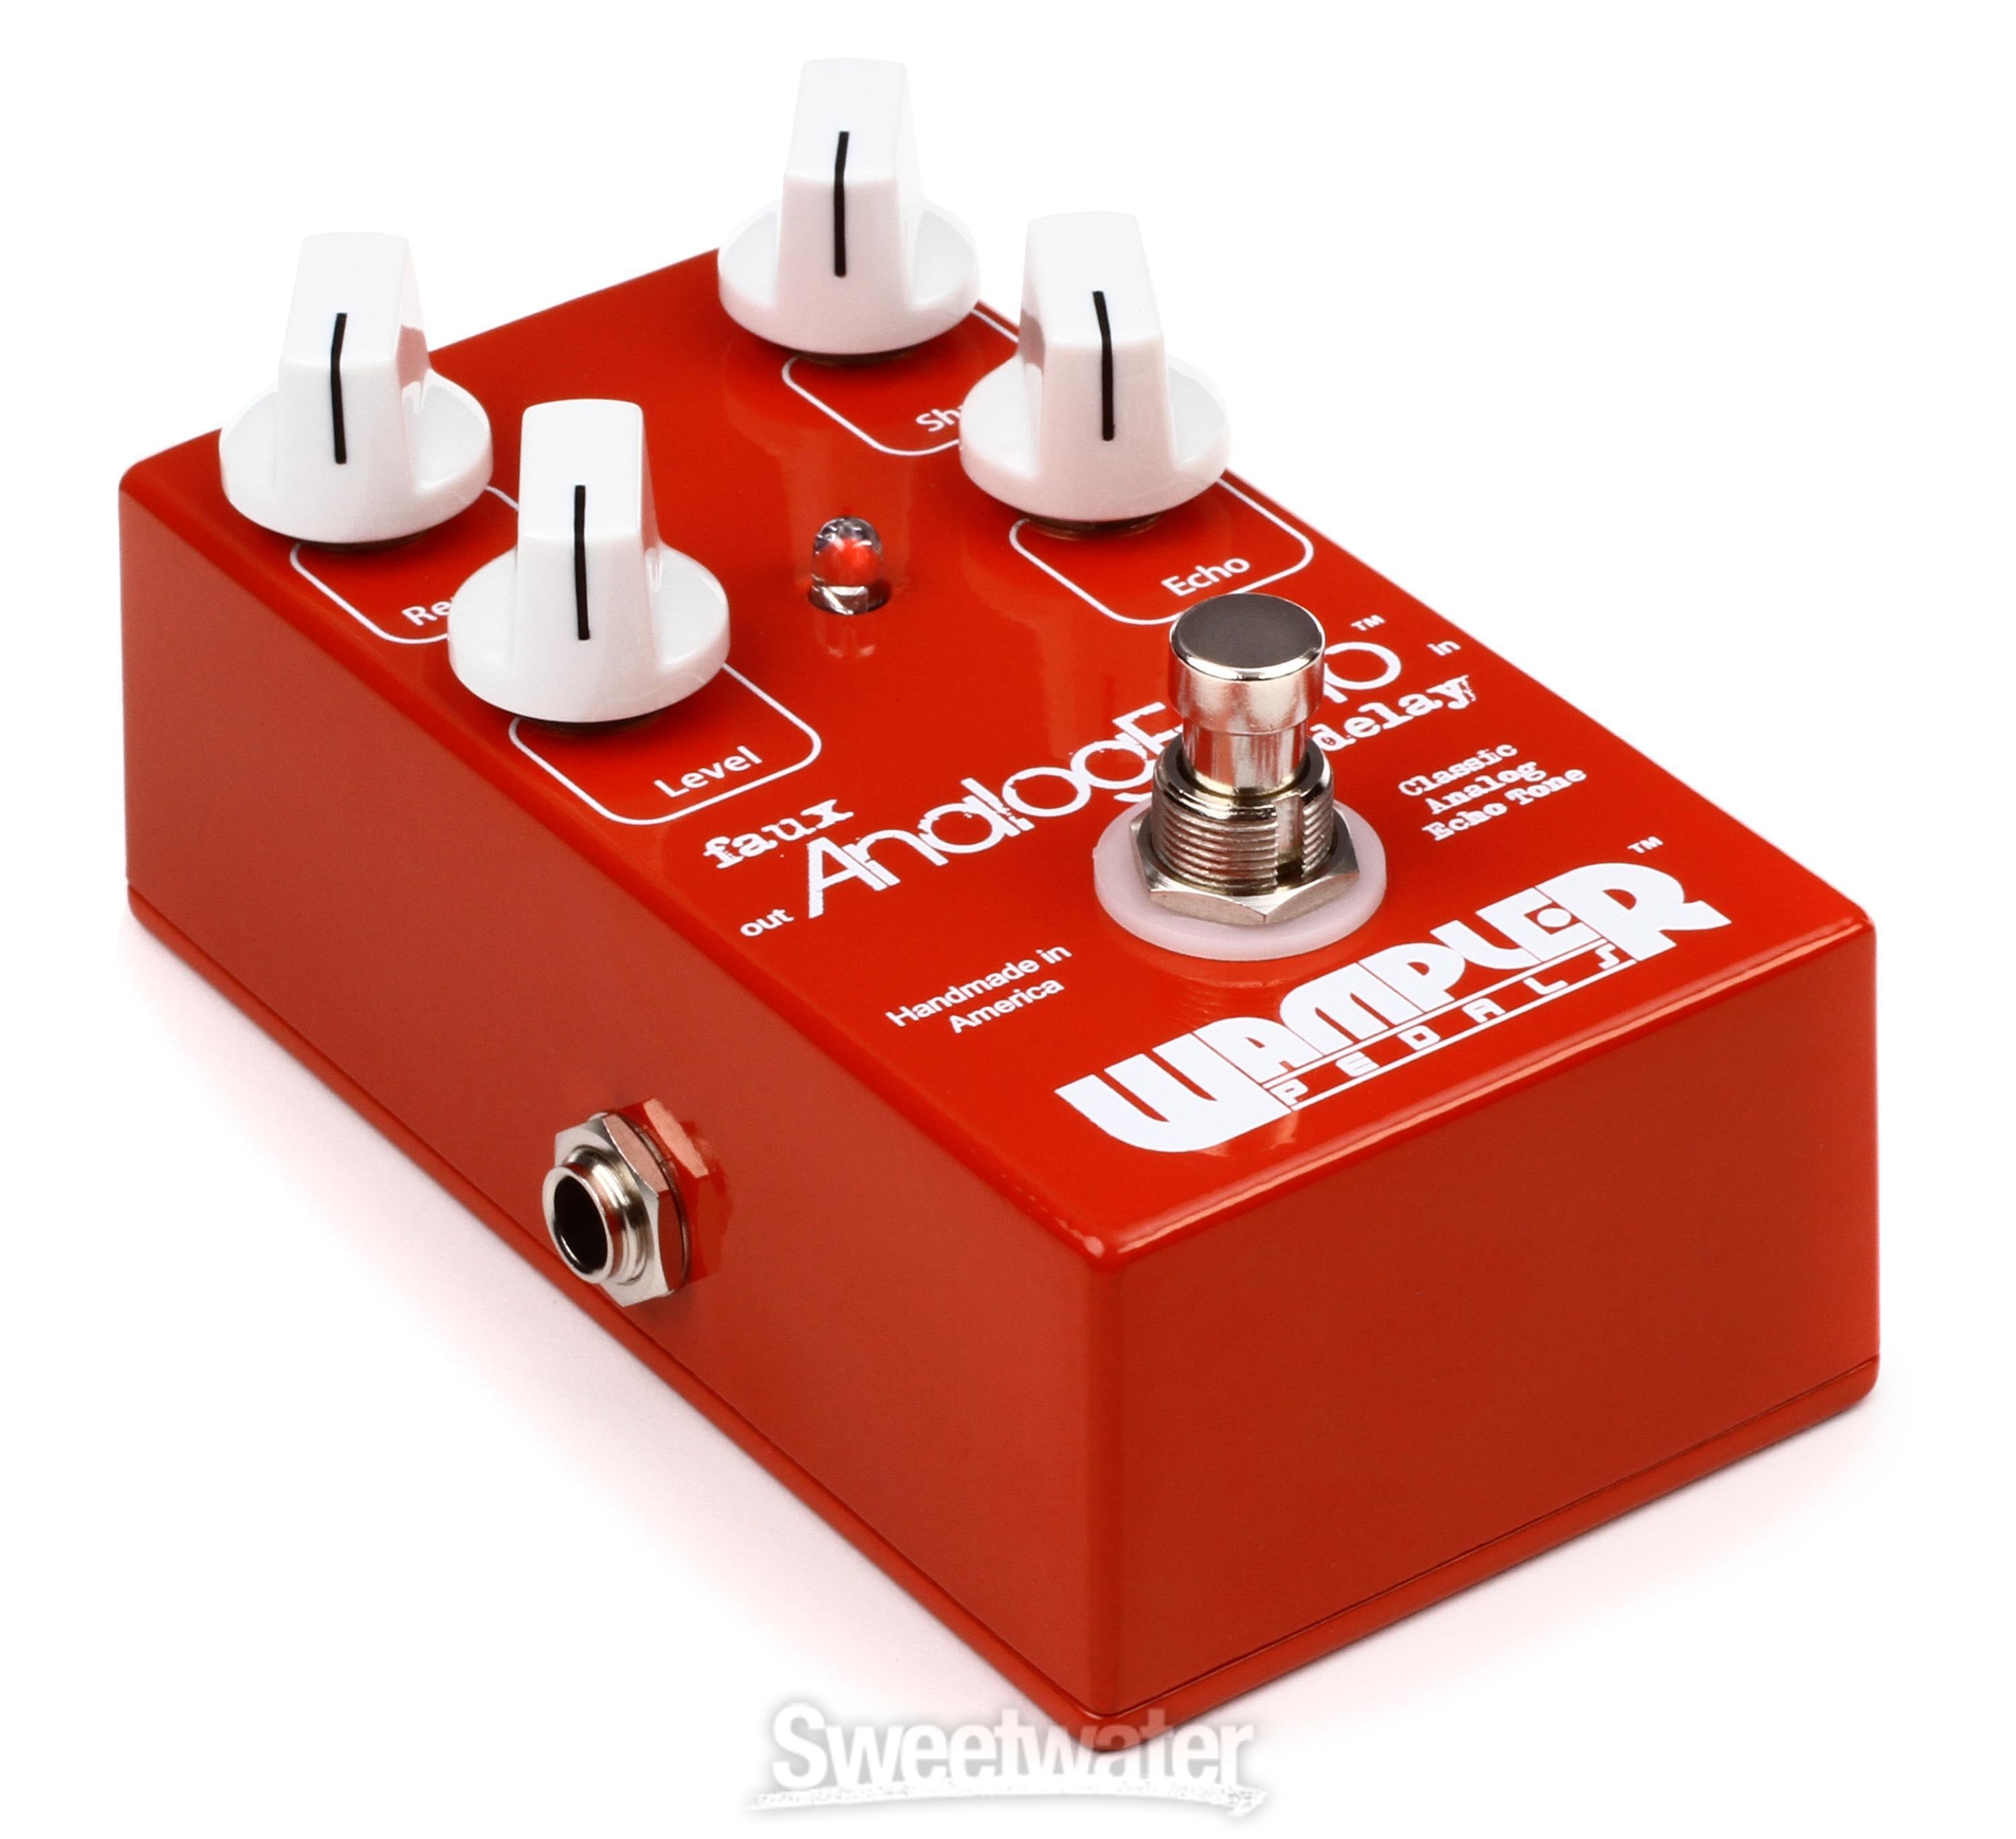 Wampler Faux Analog Echo Delay Pedal Reviews | Sweetwater